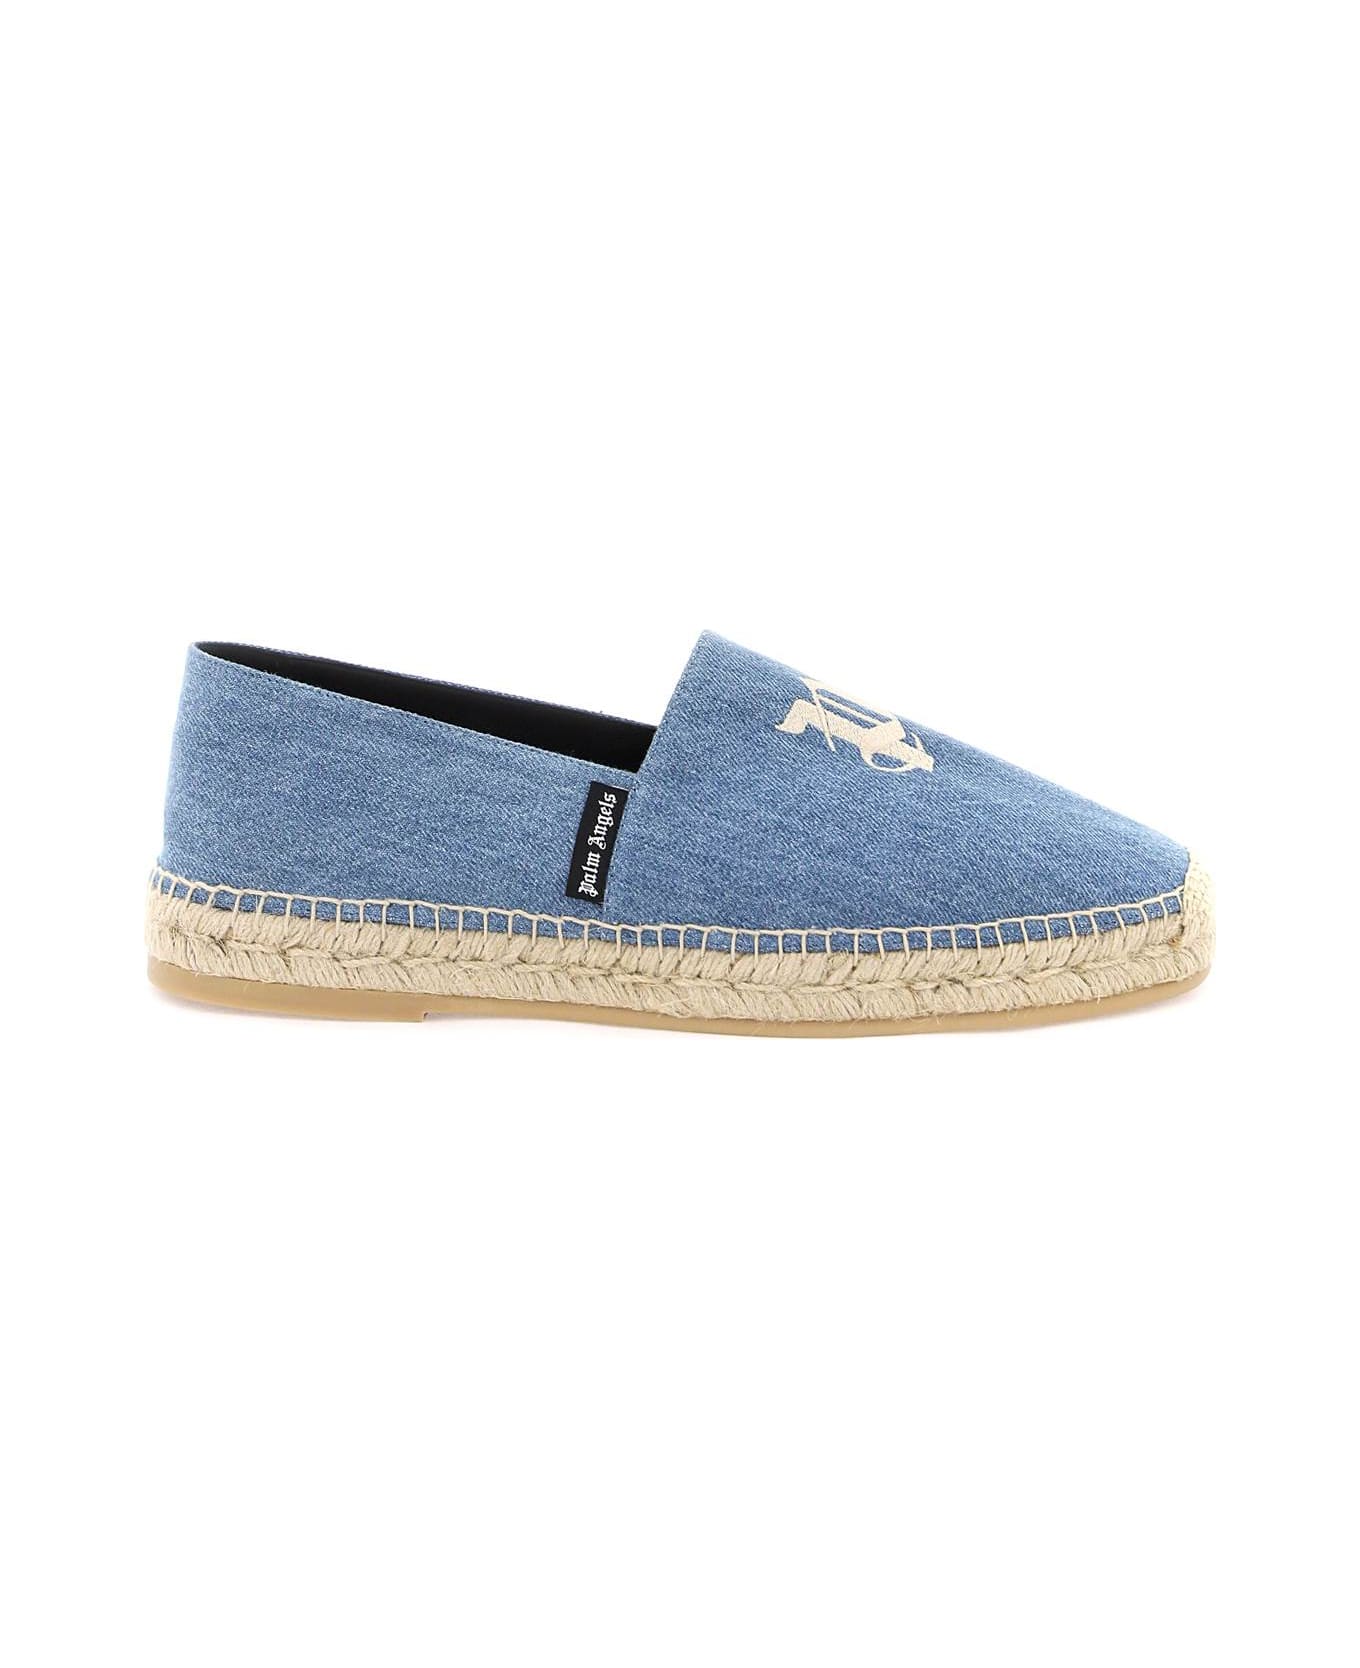 Palm Angels Espadrilles With Embroidered Logo - BLUE NO COLOR (Blue)